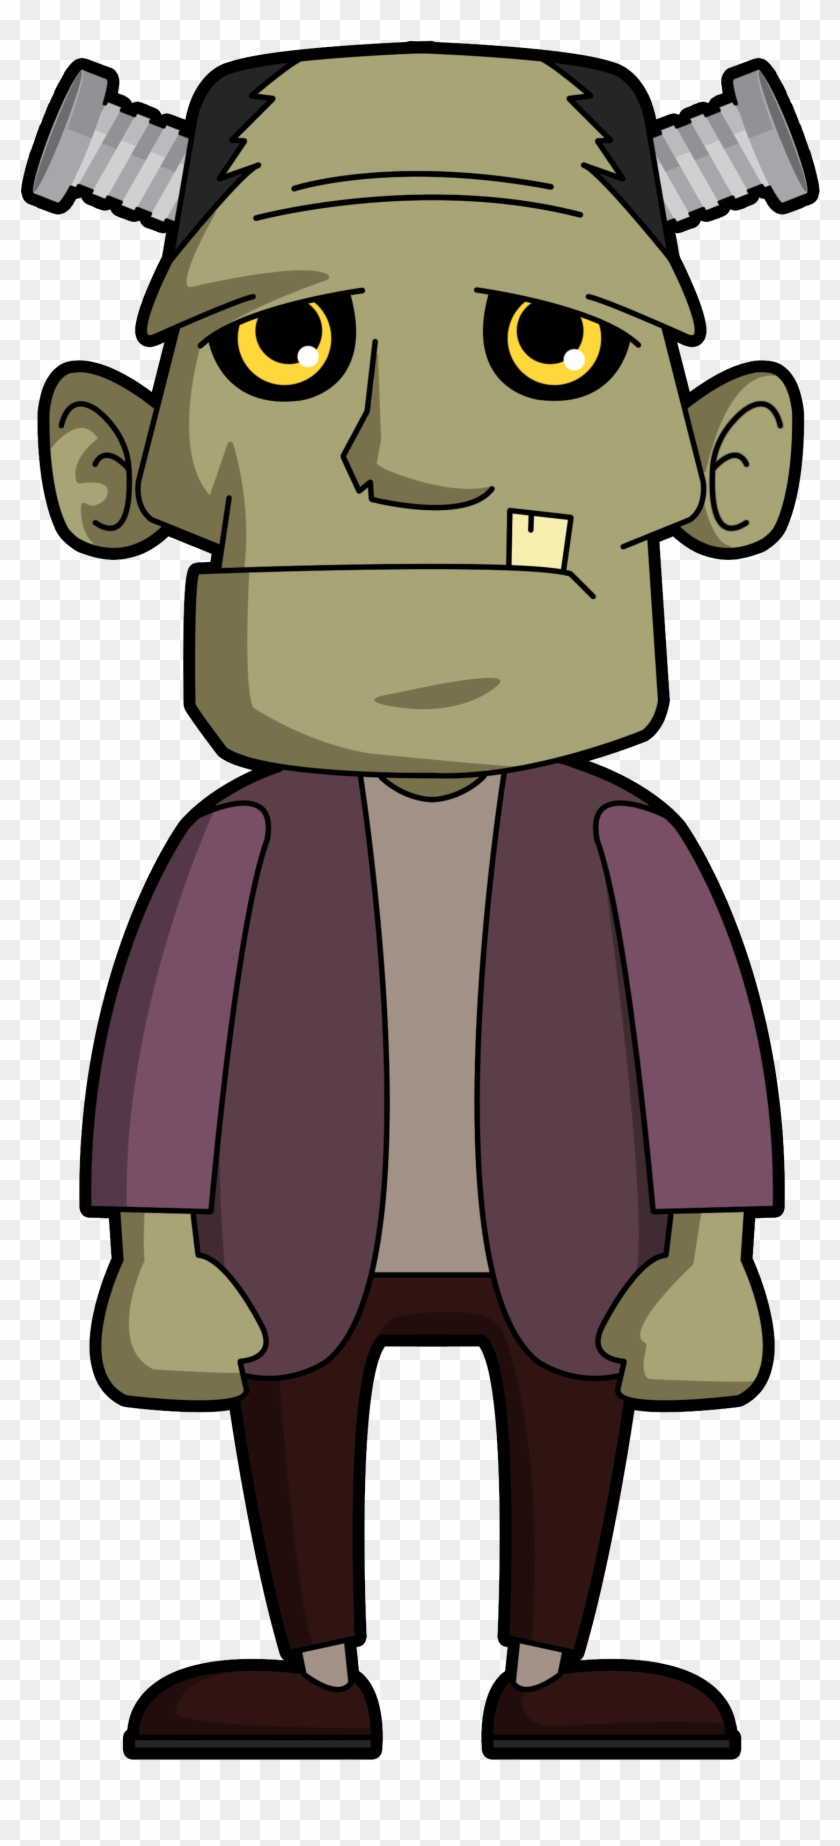 Frankenstein Free To Use Cliparts - Frankenstein Black And White Caricature - Png Download #3183373